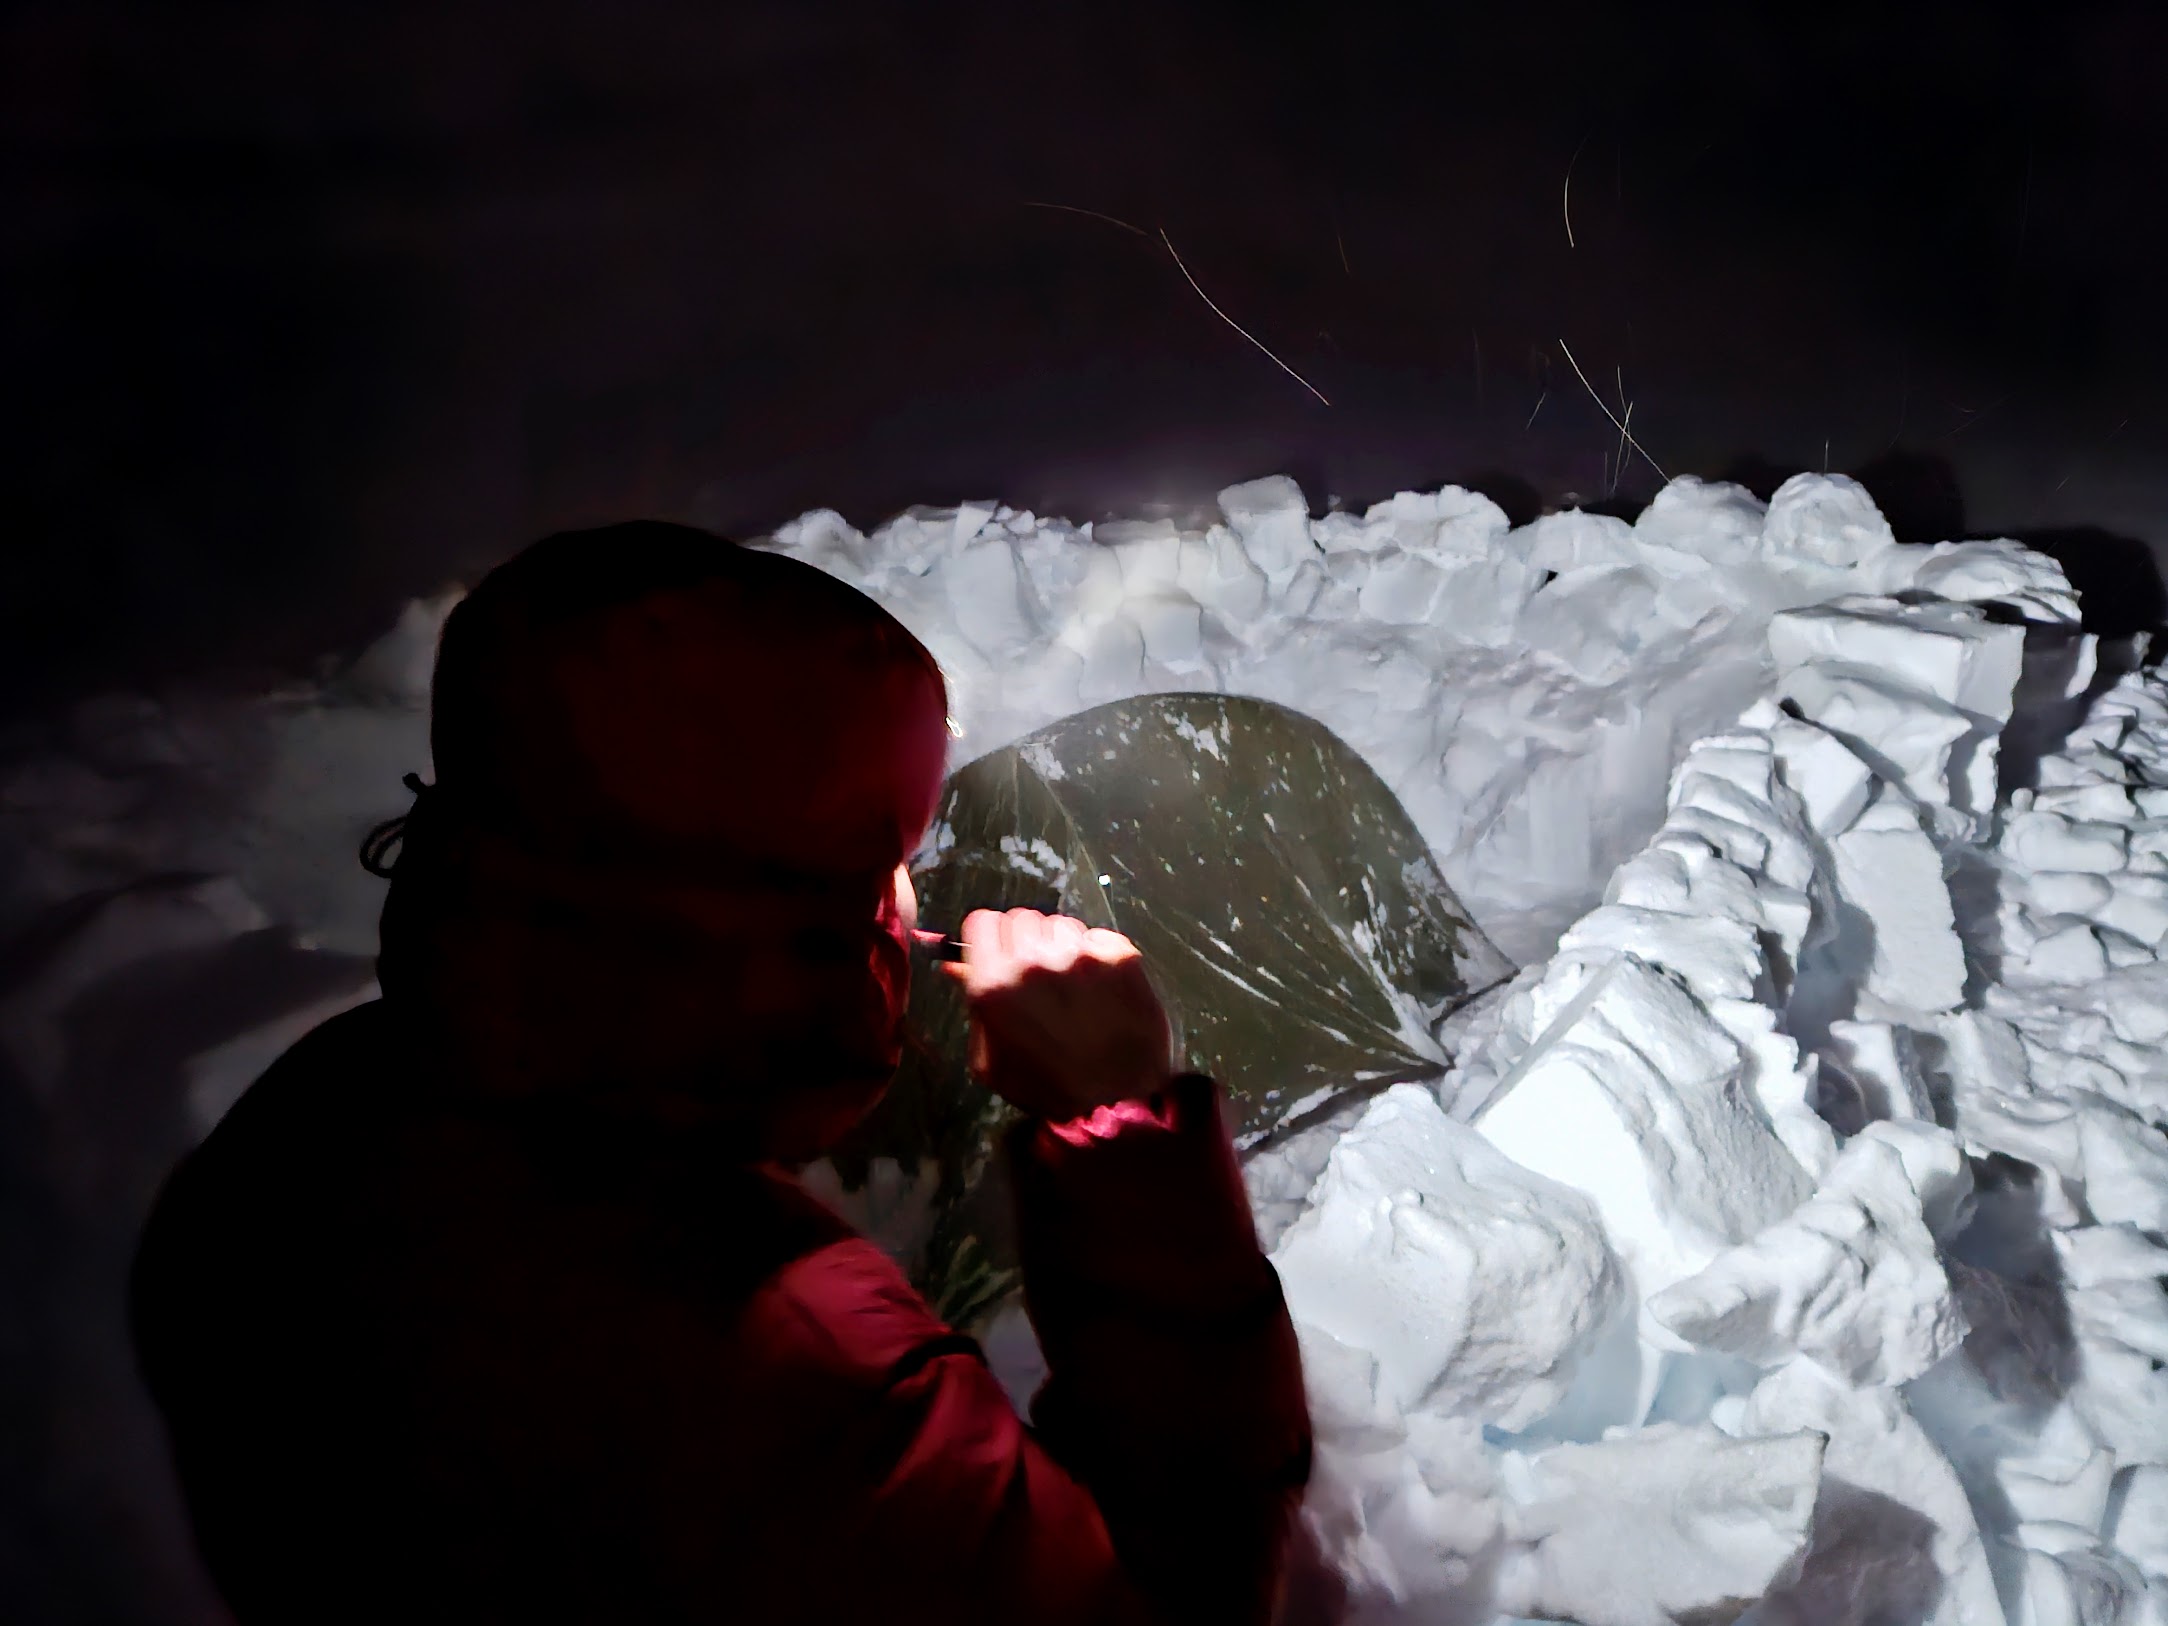 Skier brushing teeth in the dark, with a tent covered in snow, surrounded by a wind wall, in the background